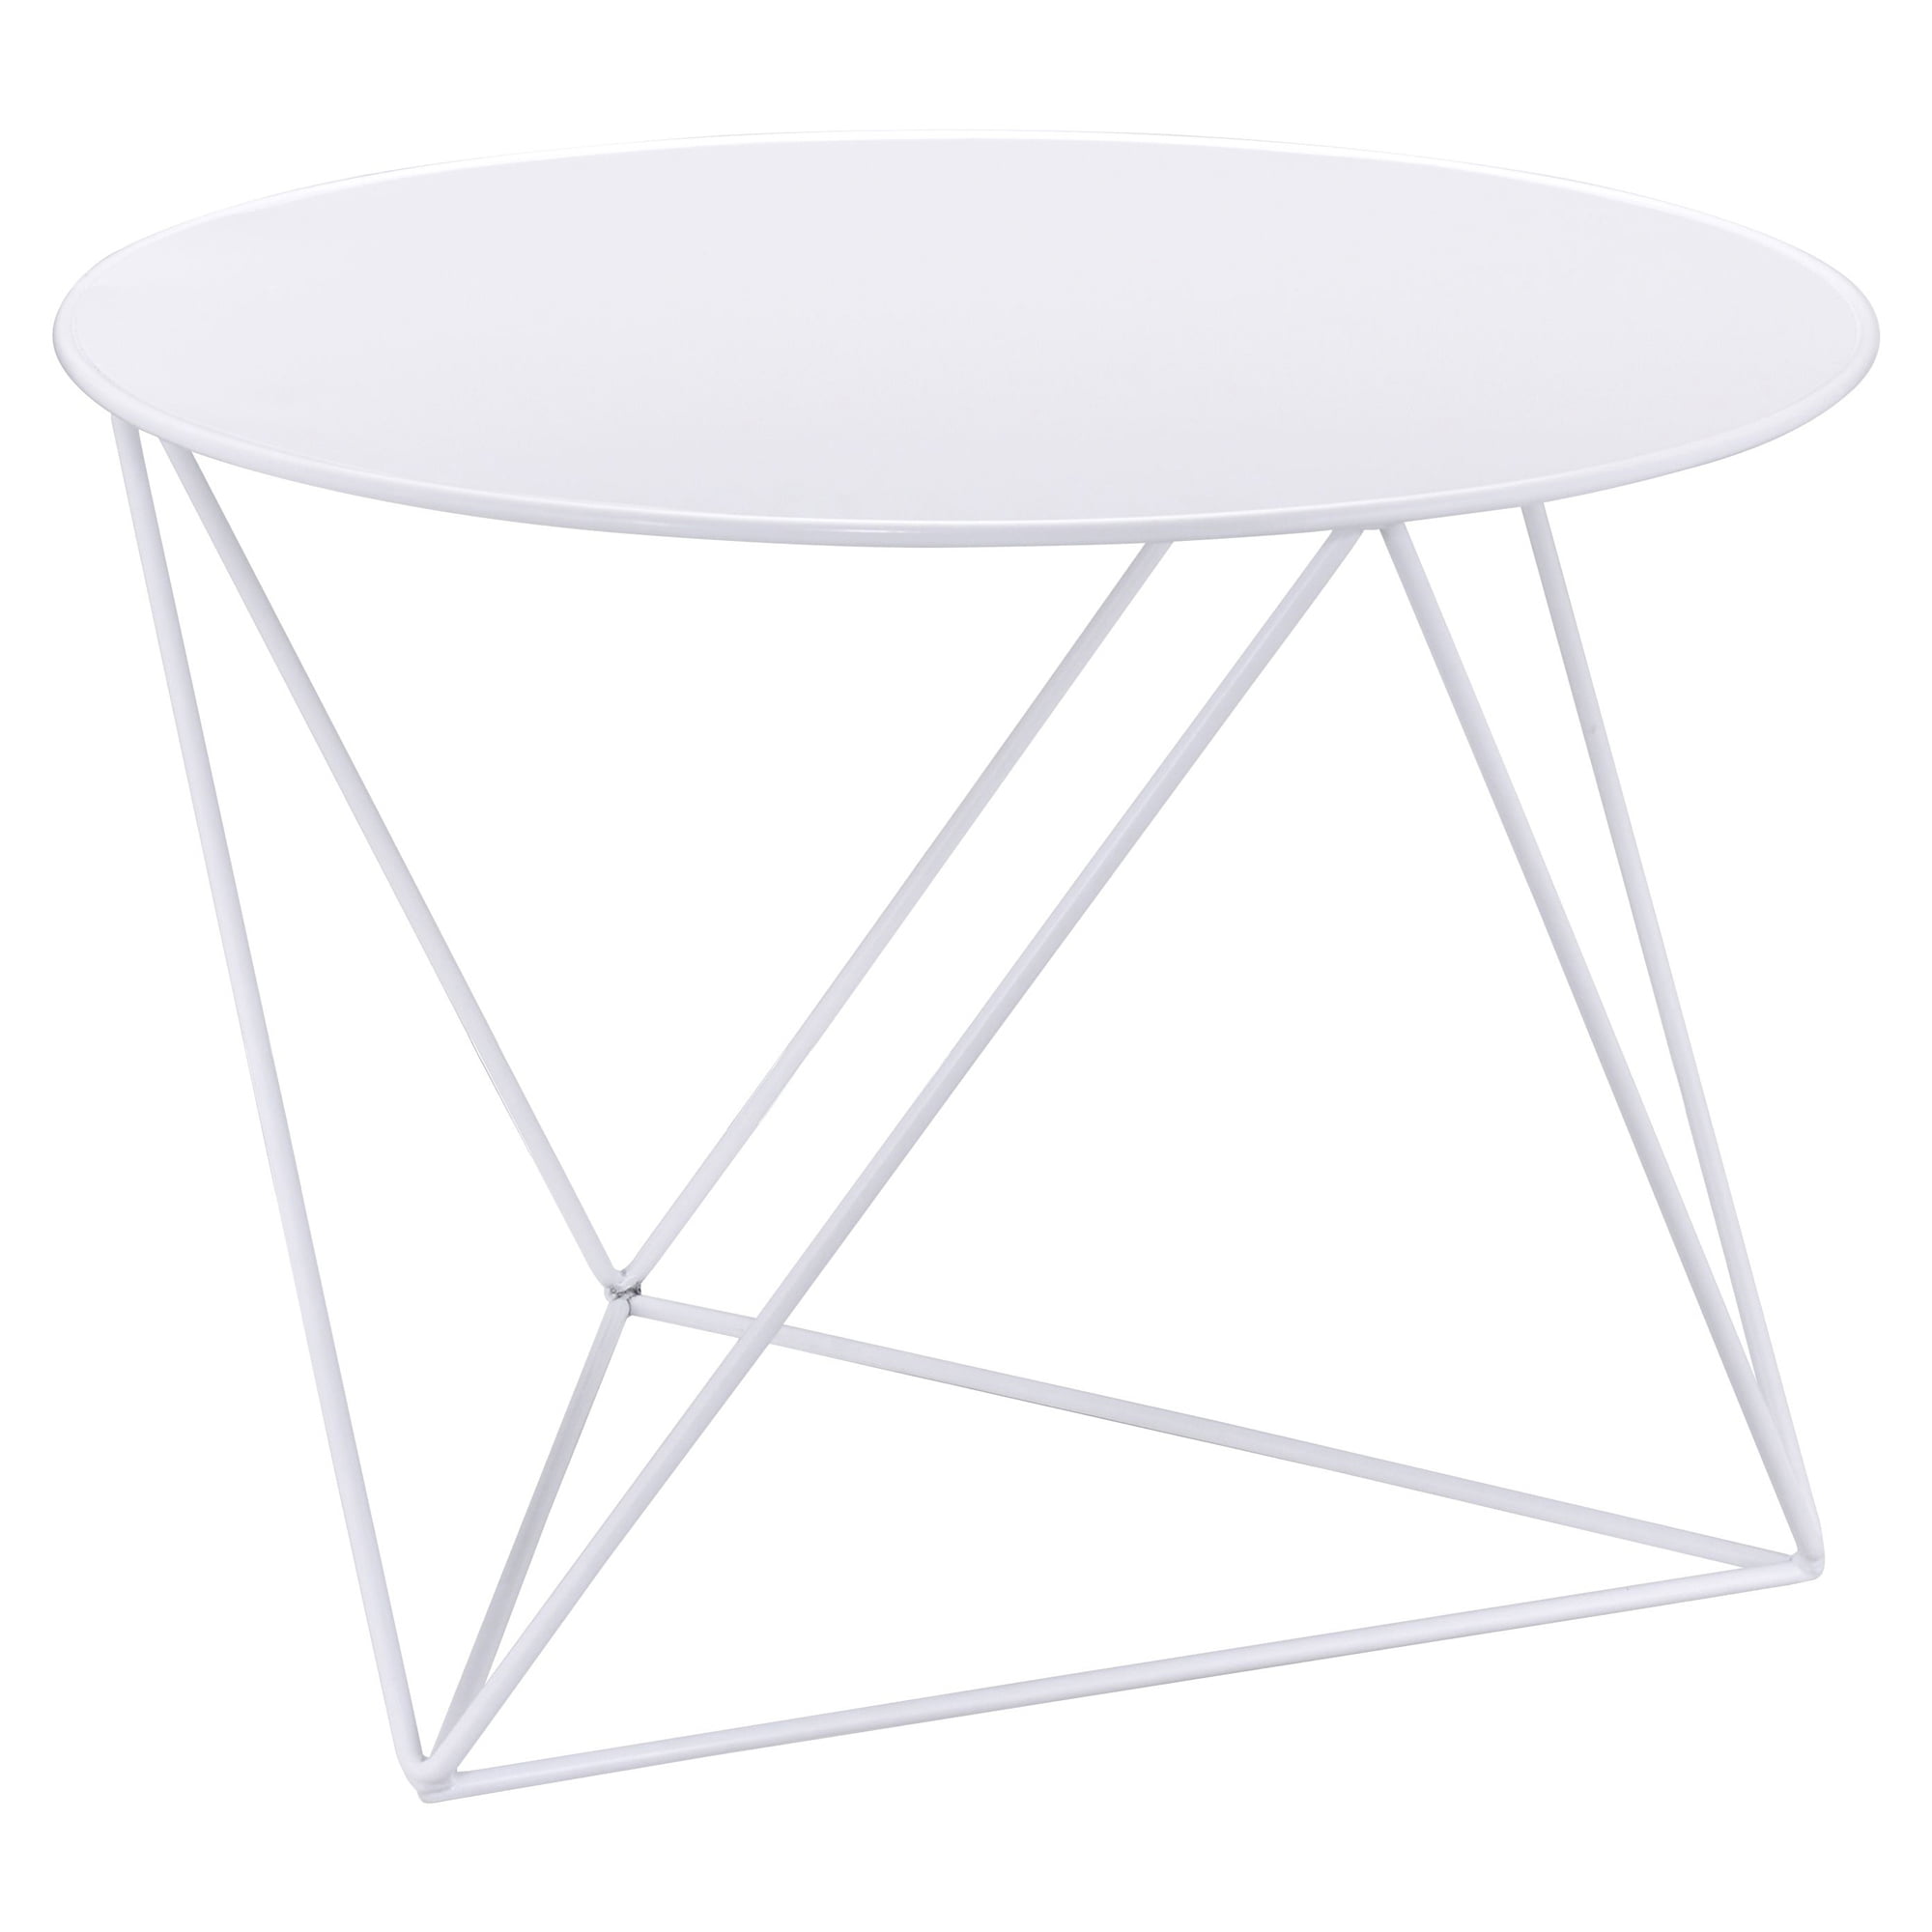 Picture of Acme Furniture 97842 17 x 23 x 23 in. Epidia Round Accent Table, White